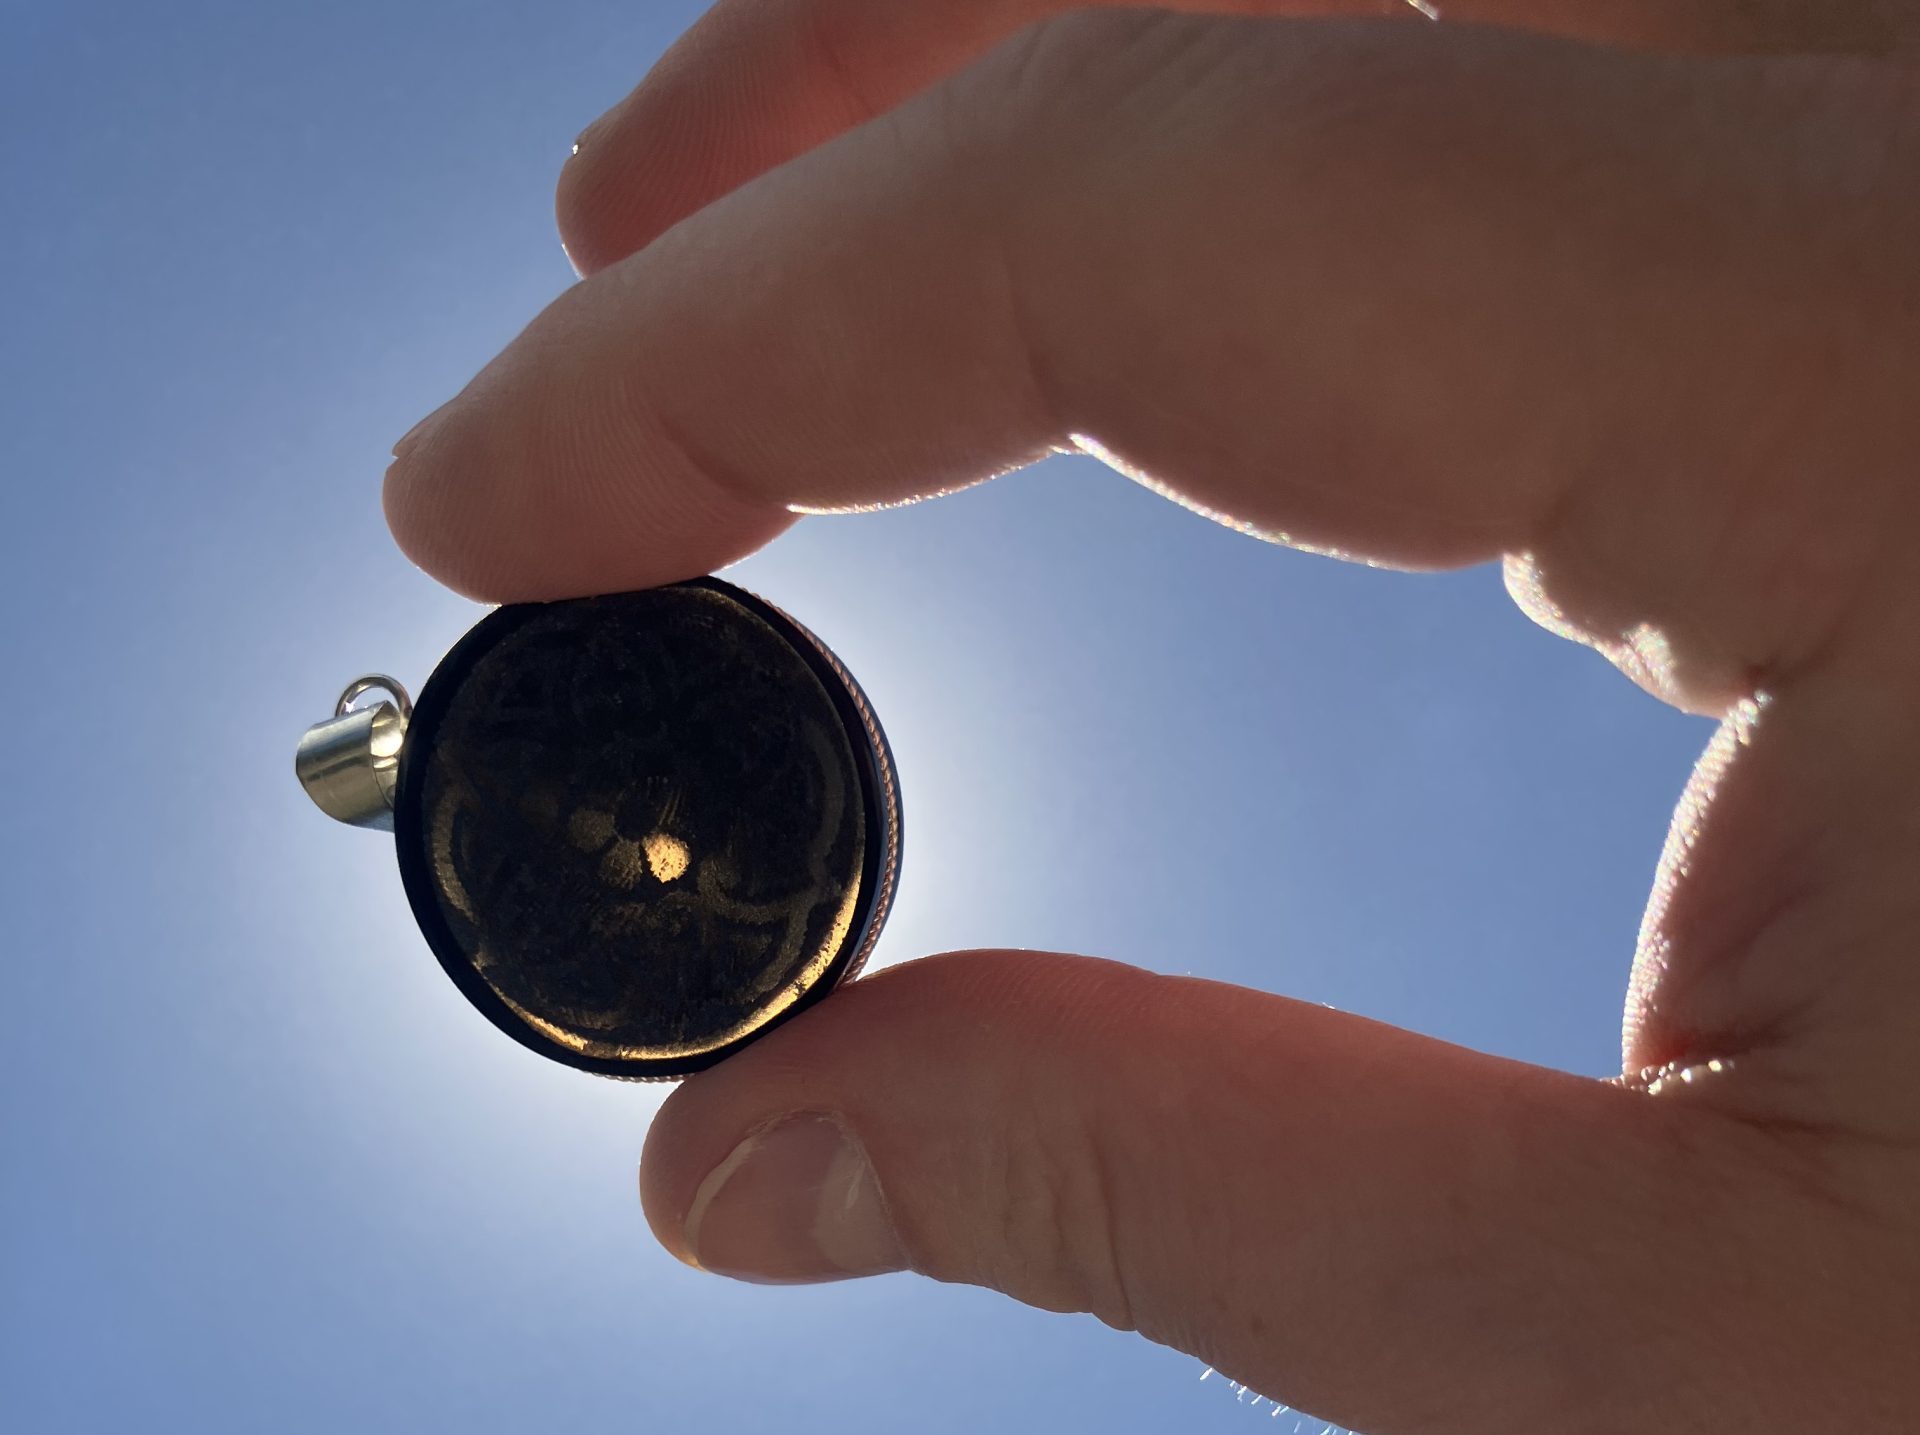 Obsidian Looking Glass, used by the Mayans to observe the position of the sun leading to the Mayan calendar